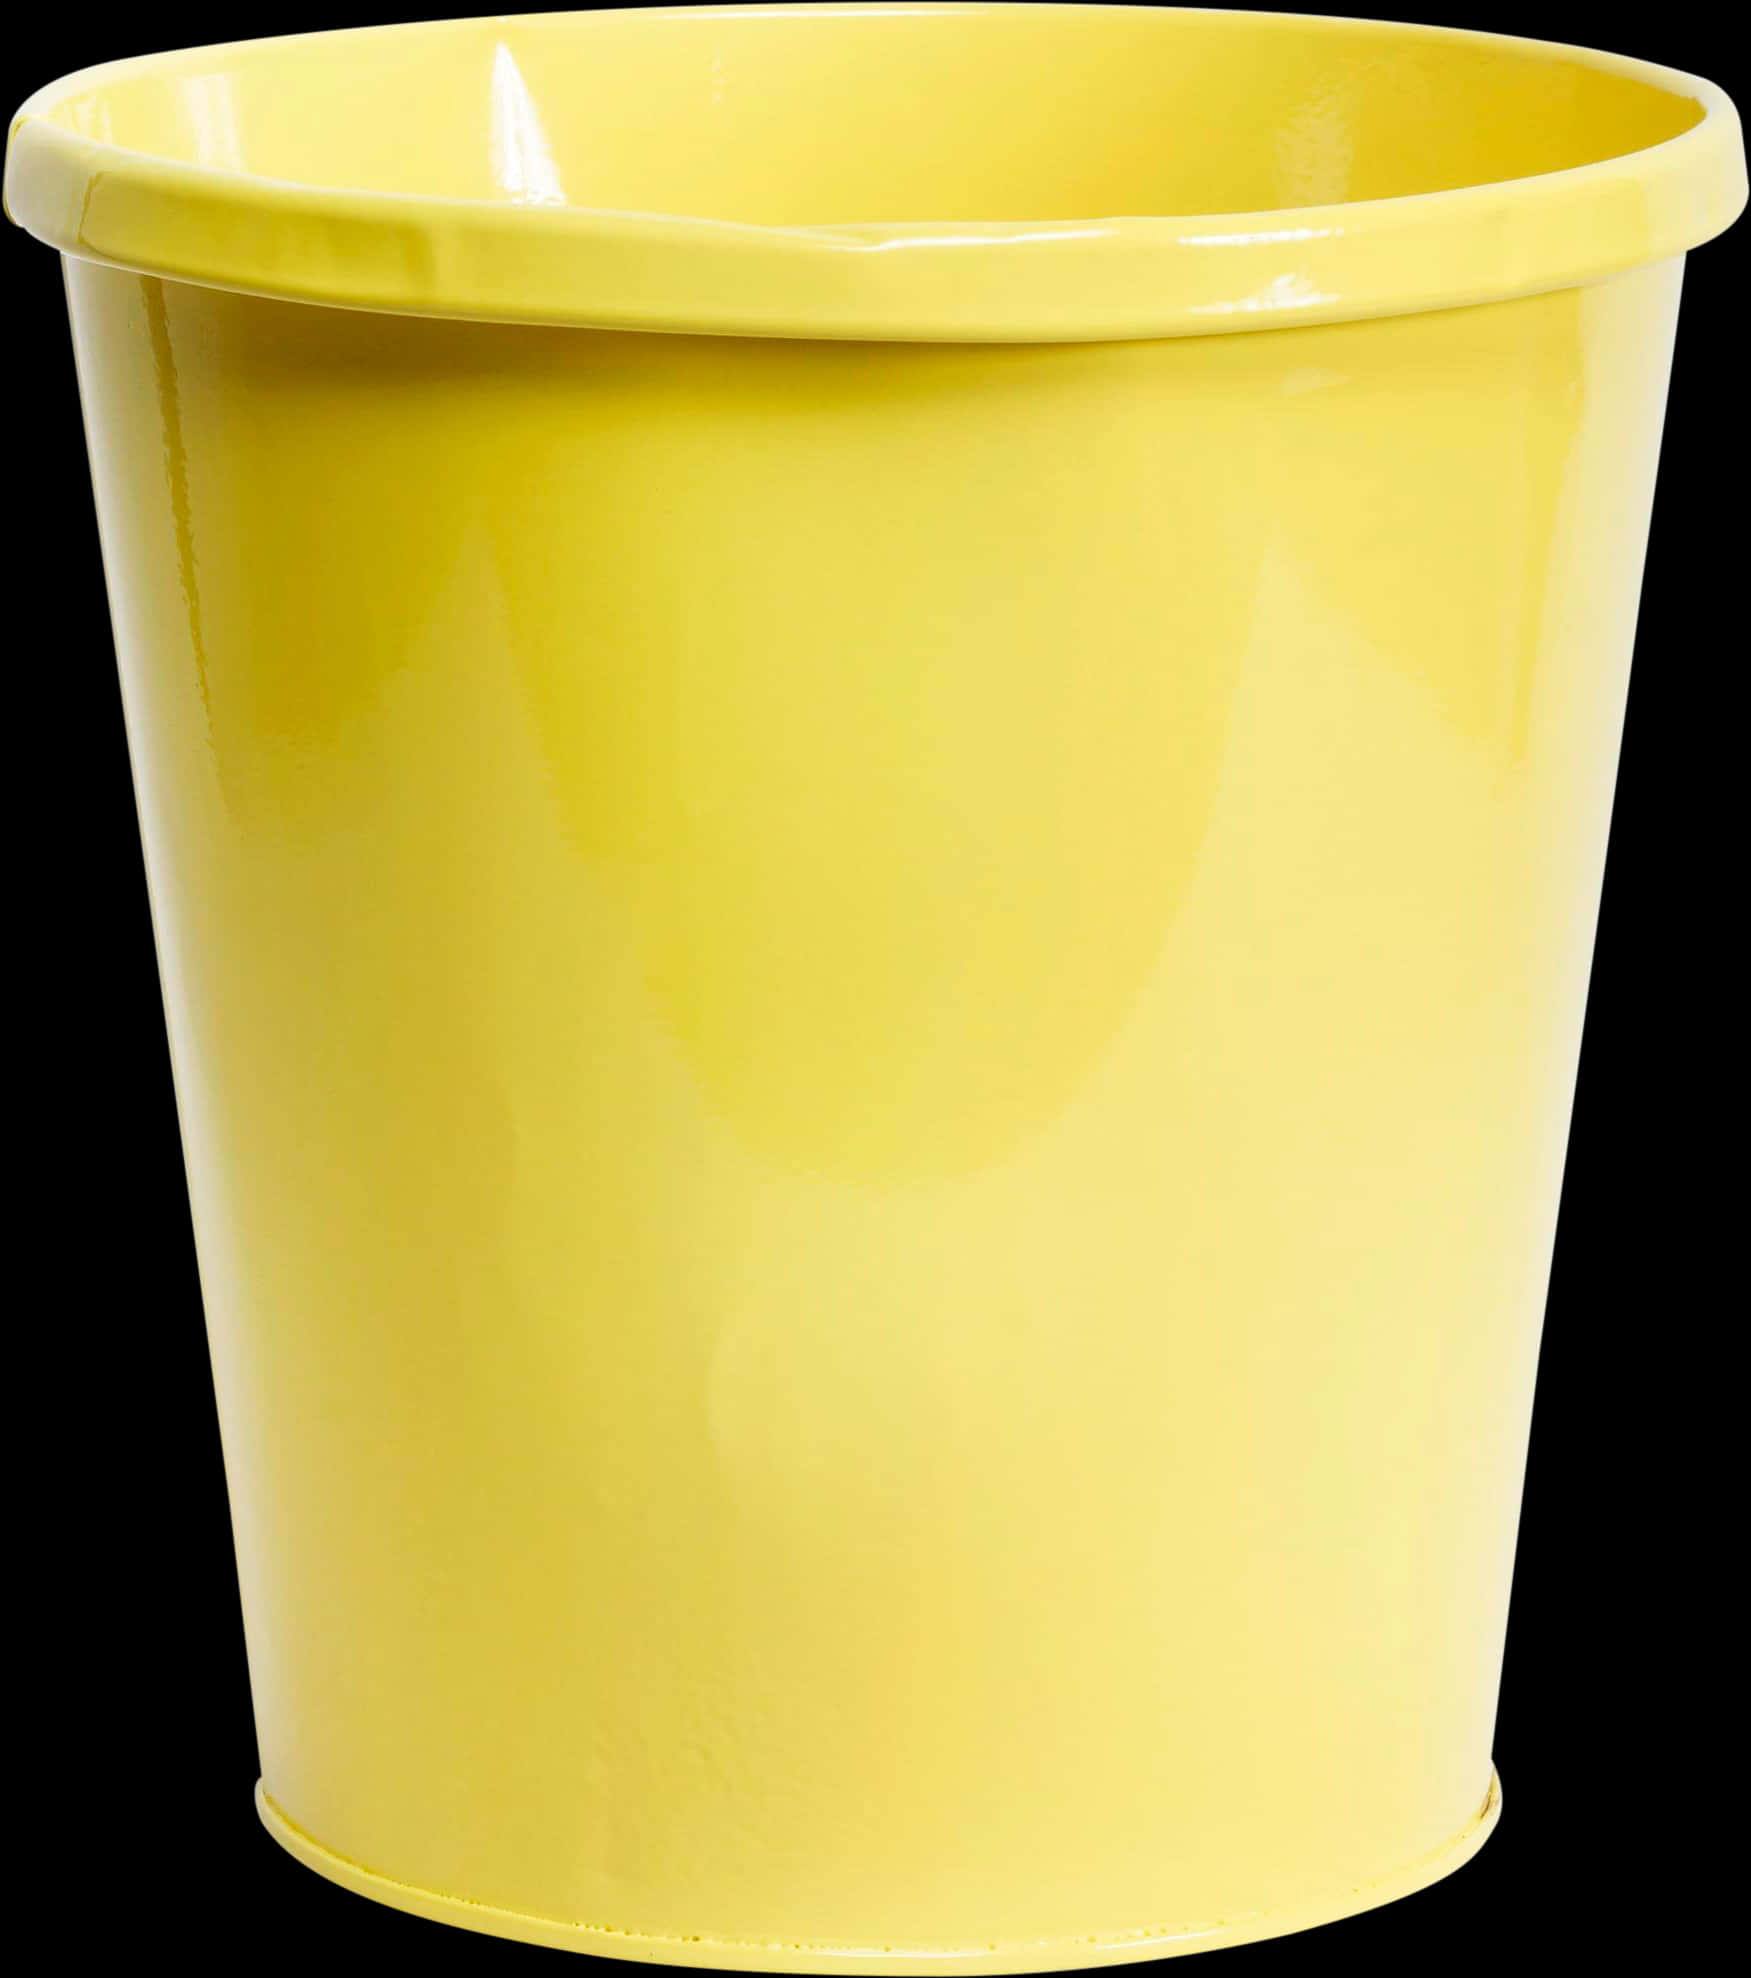 Yellow Plastic Trash Can Single Item PNG